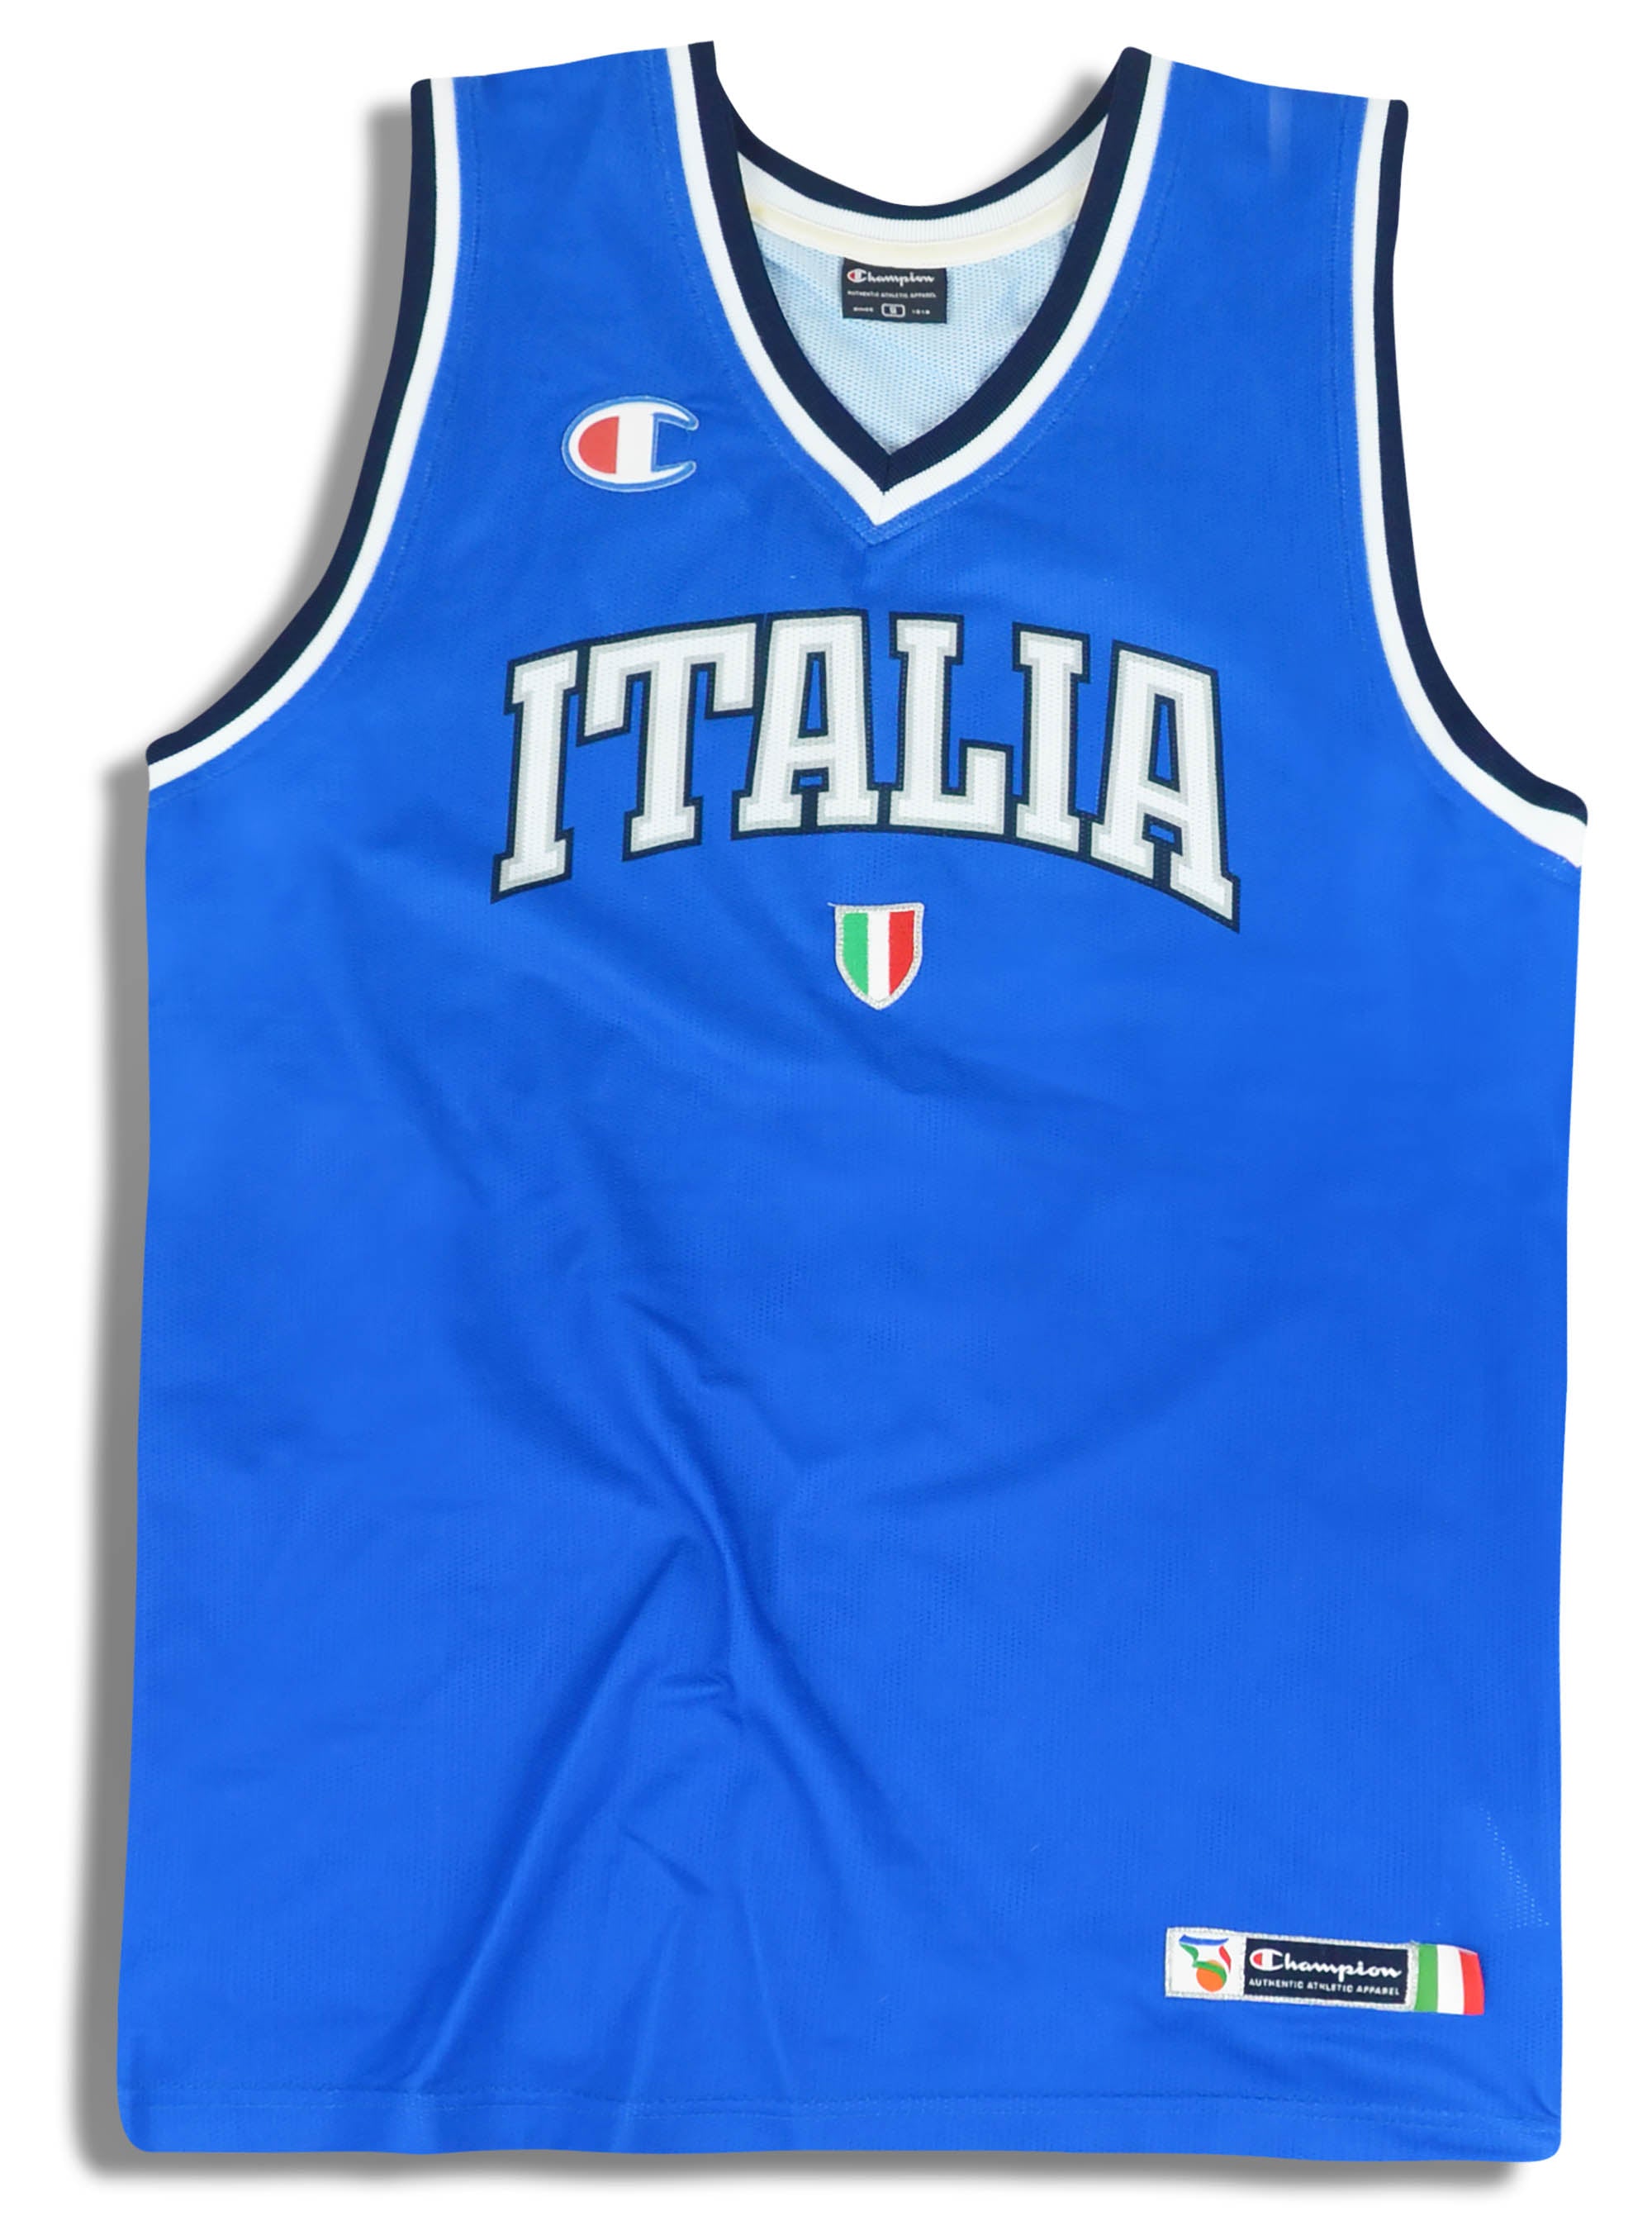 2000's ITALY NATIONAL BASKETBALL TEAM CHAMPION JERSEY (HOME) S - Classic  American Sports